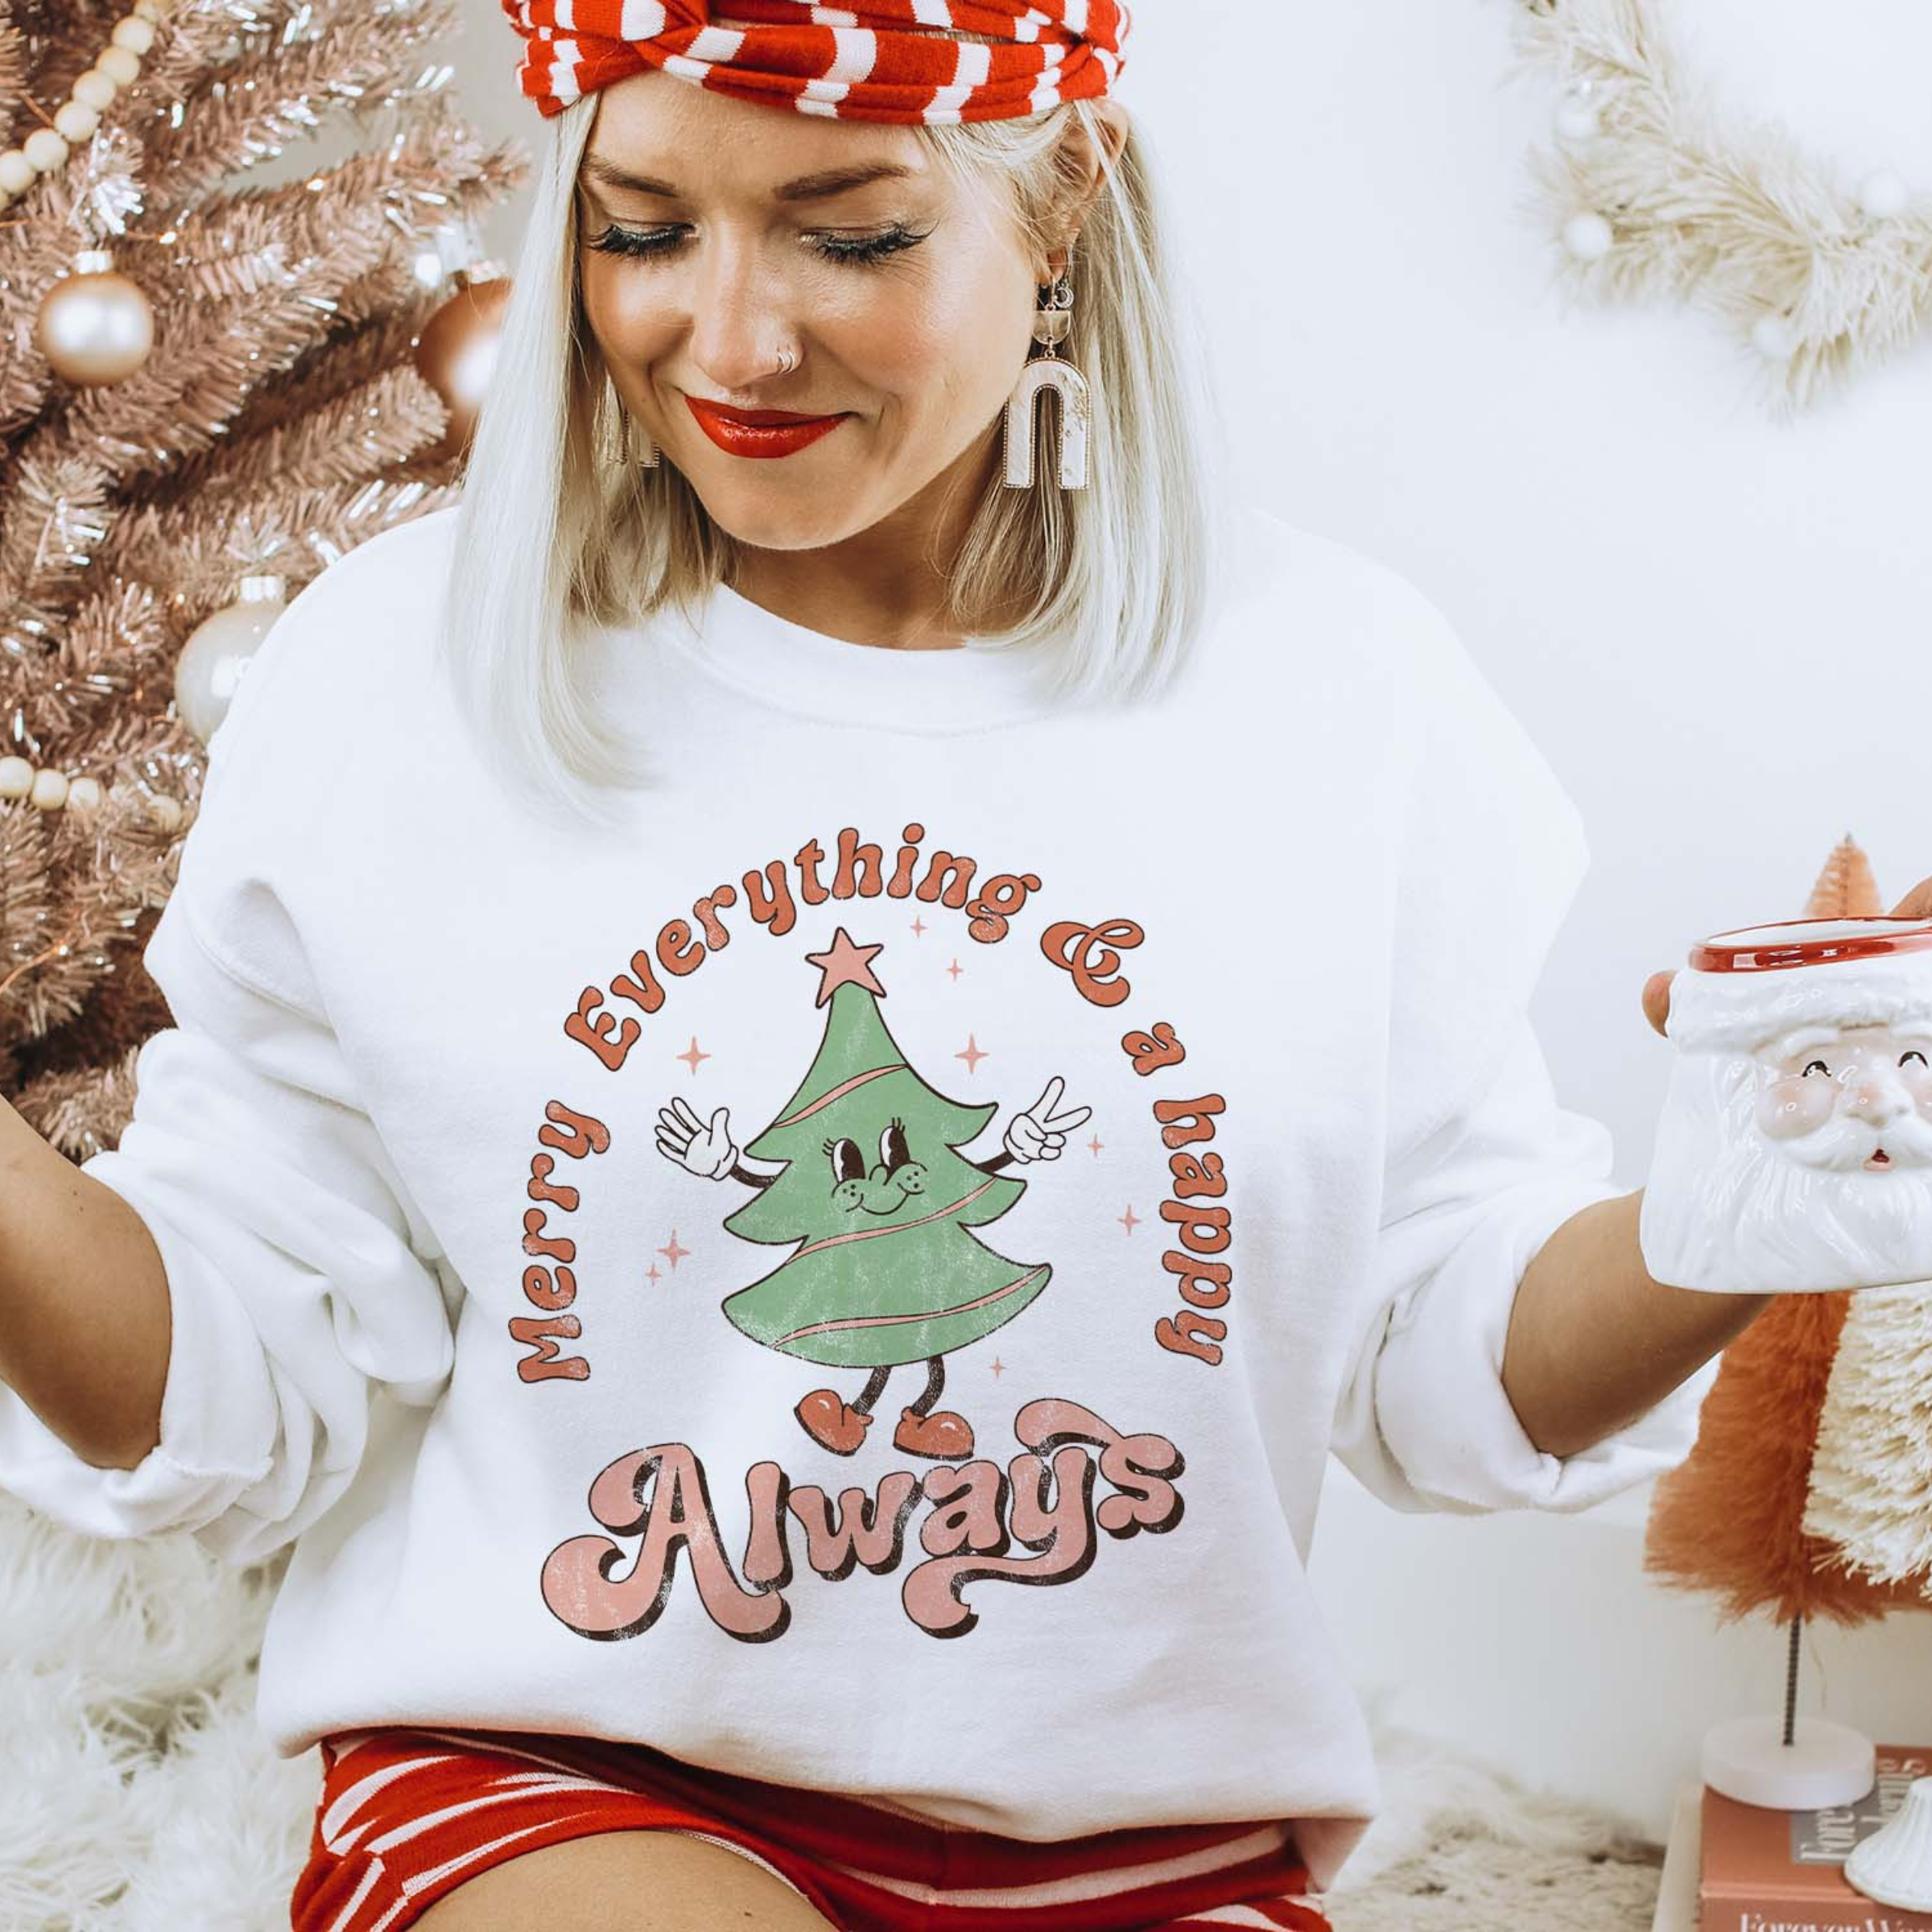 This white sweatshirt includes a crew neckline, long sleeves, and a graphic that says "Merry Everything & a happy Always" in a cute mix of fonts with a Christmas Tree throwing up the peace sign. The model has this sweatshirt paired with a red and white striped headband, white earrings, and a pair of red and white striped shorts. She also has the sleeves rolled and is holding a Santa Clause mug. 